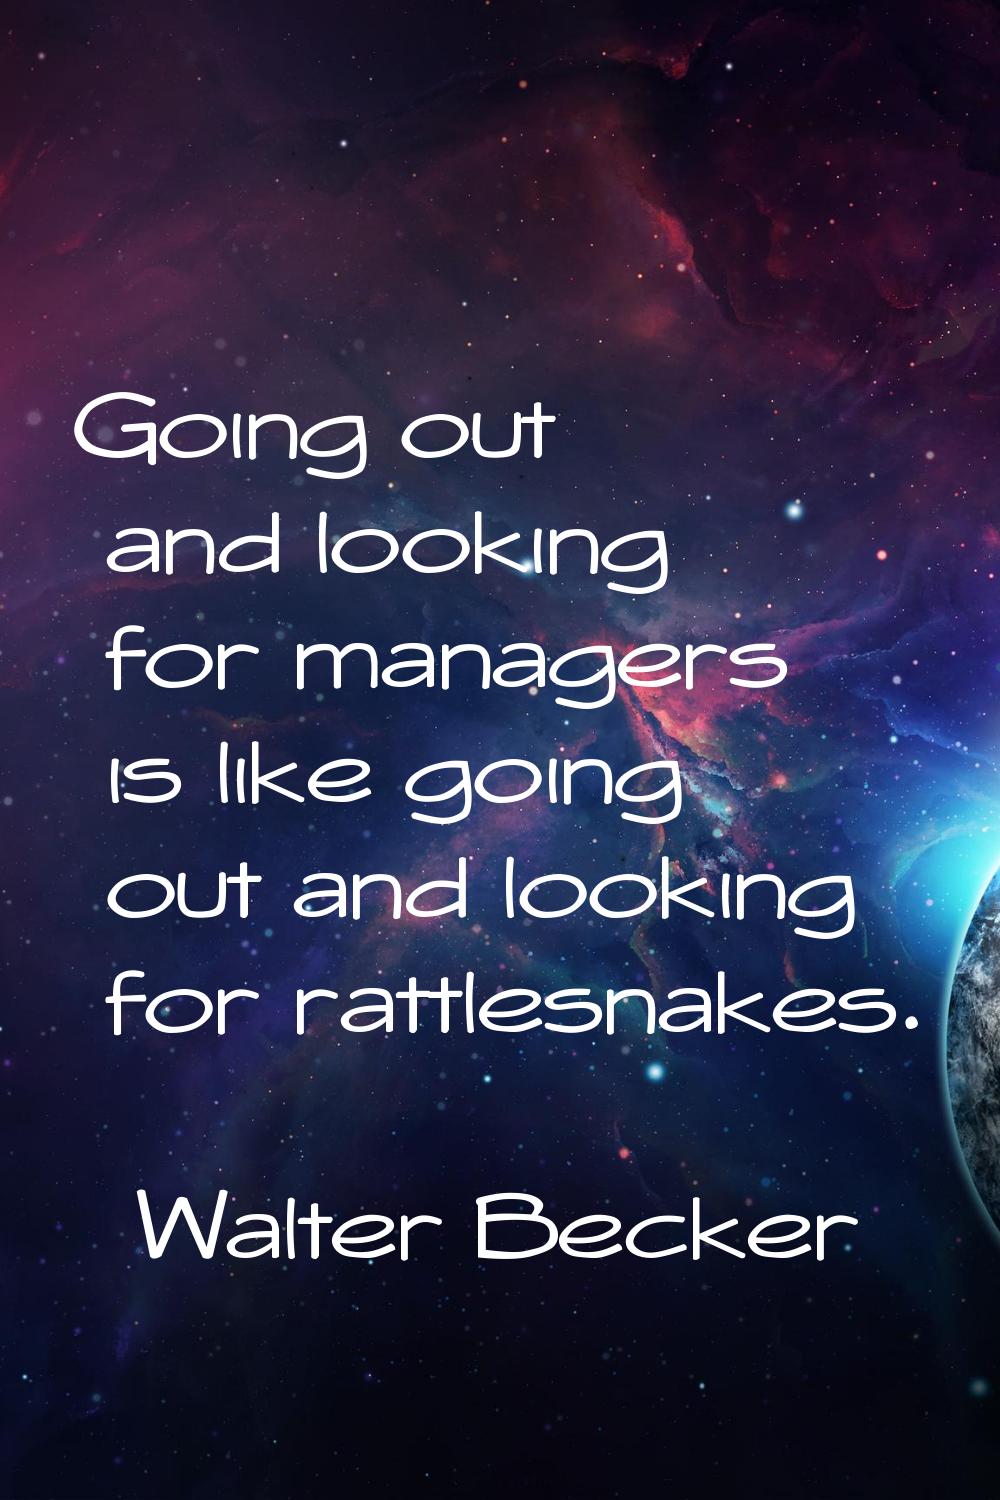 Going out and looking for managers is like going out and looking for rattlesnakes.